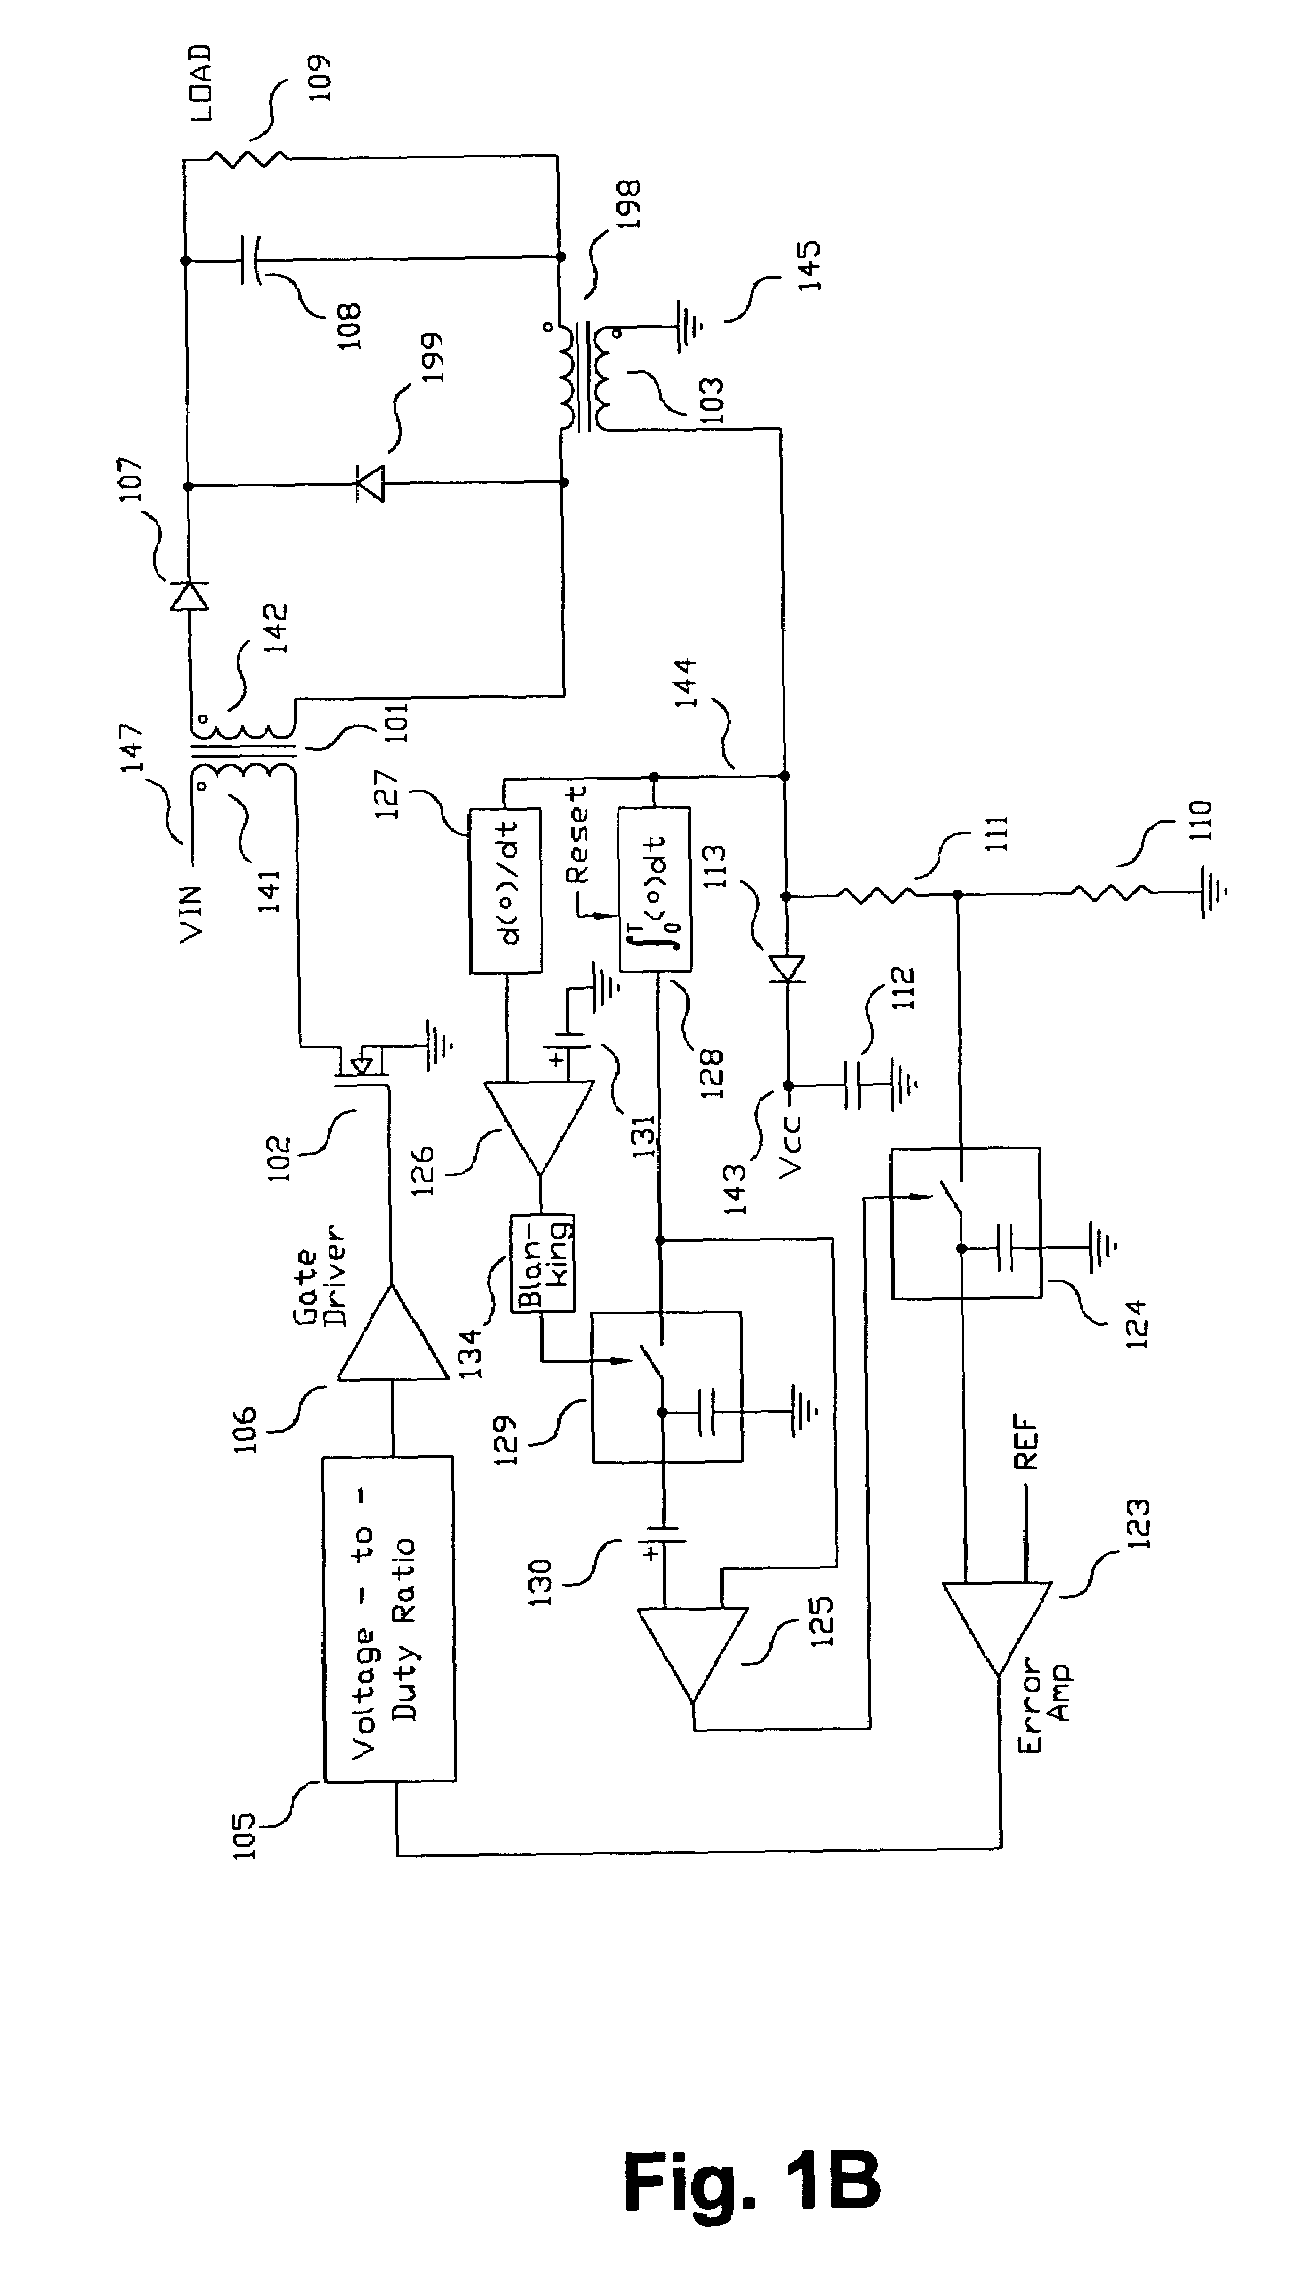 Switching power converter and method of controlling output voltage thereof using predictive sensing of magnetic flux